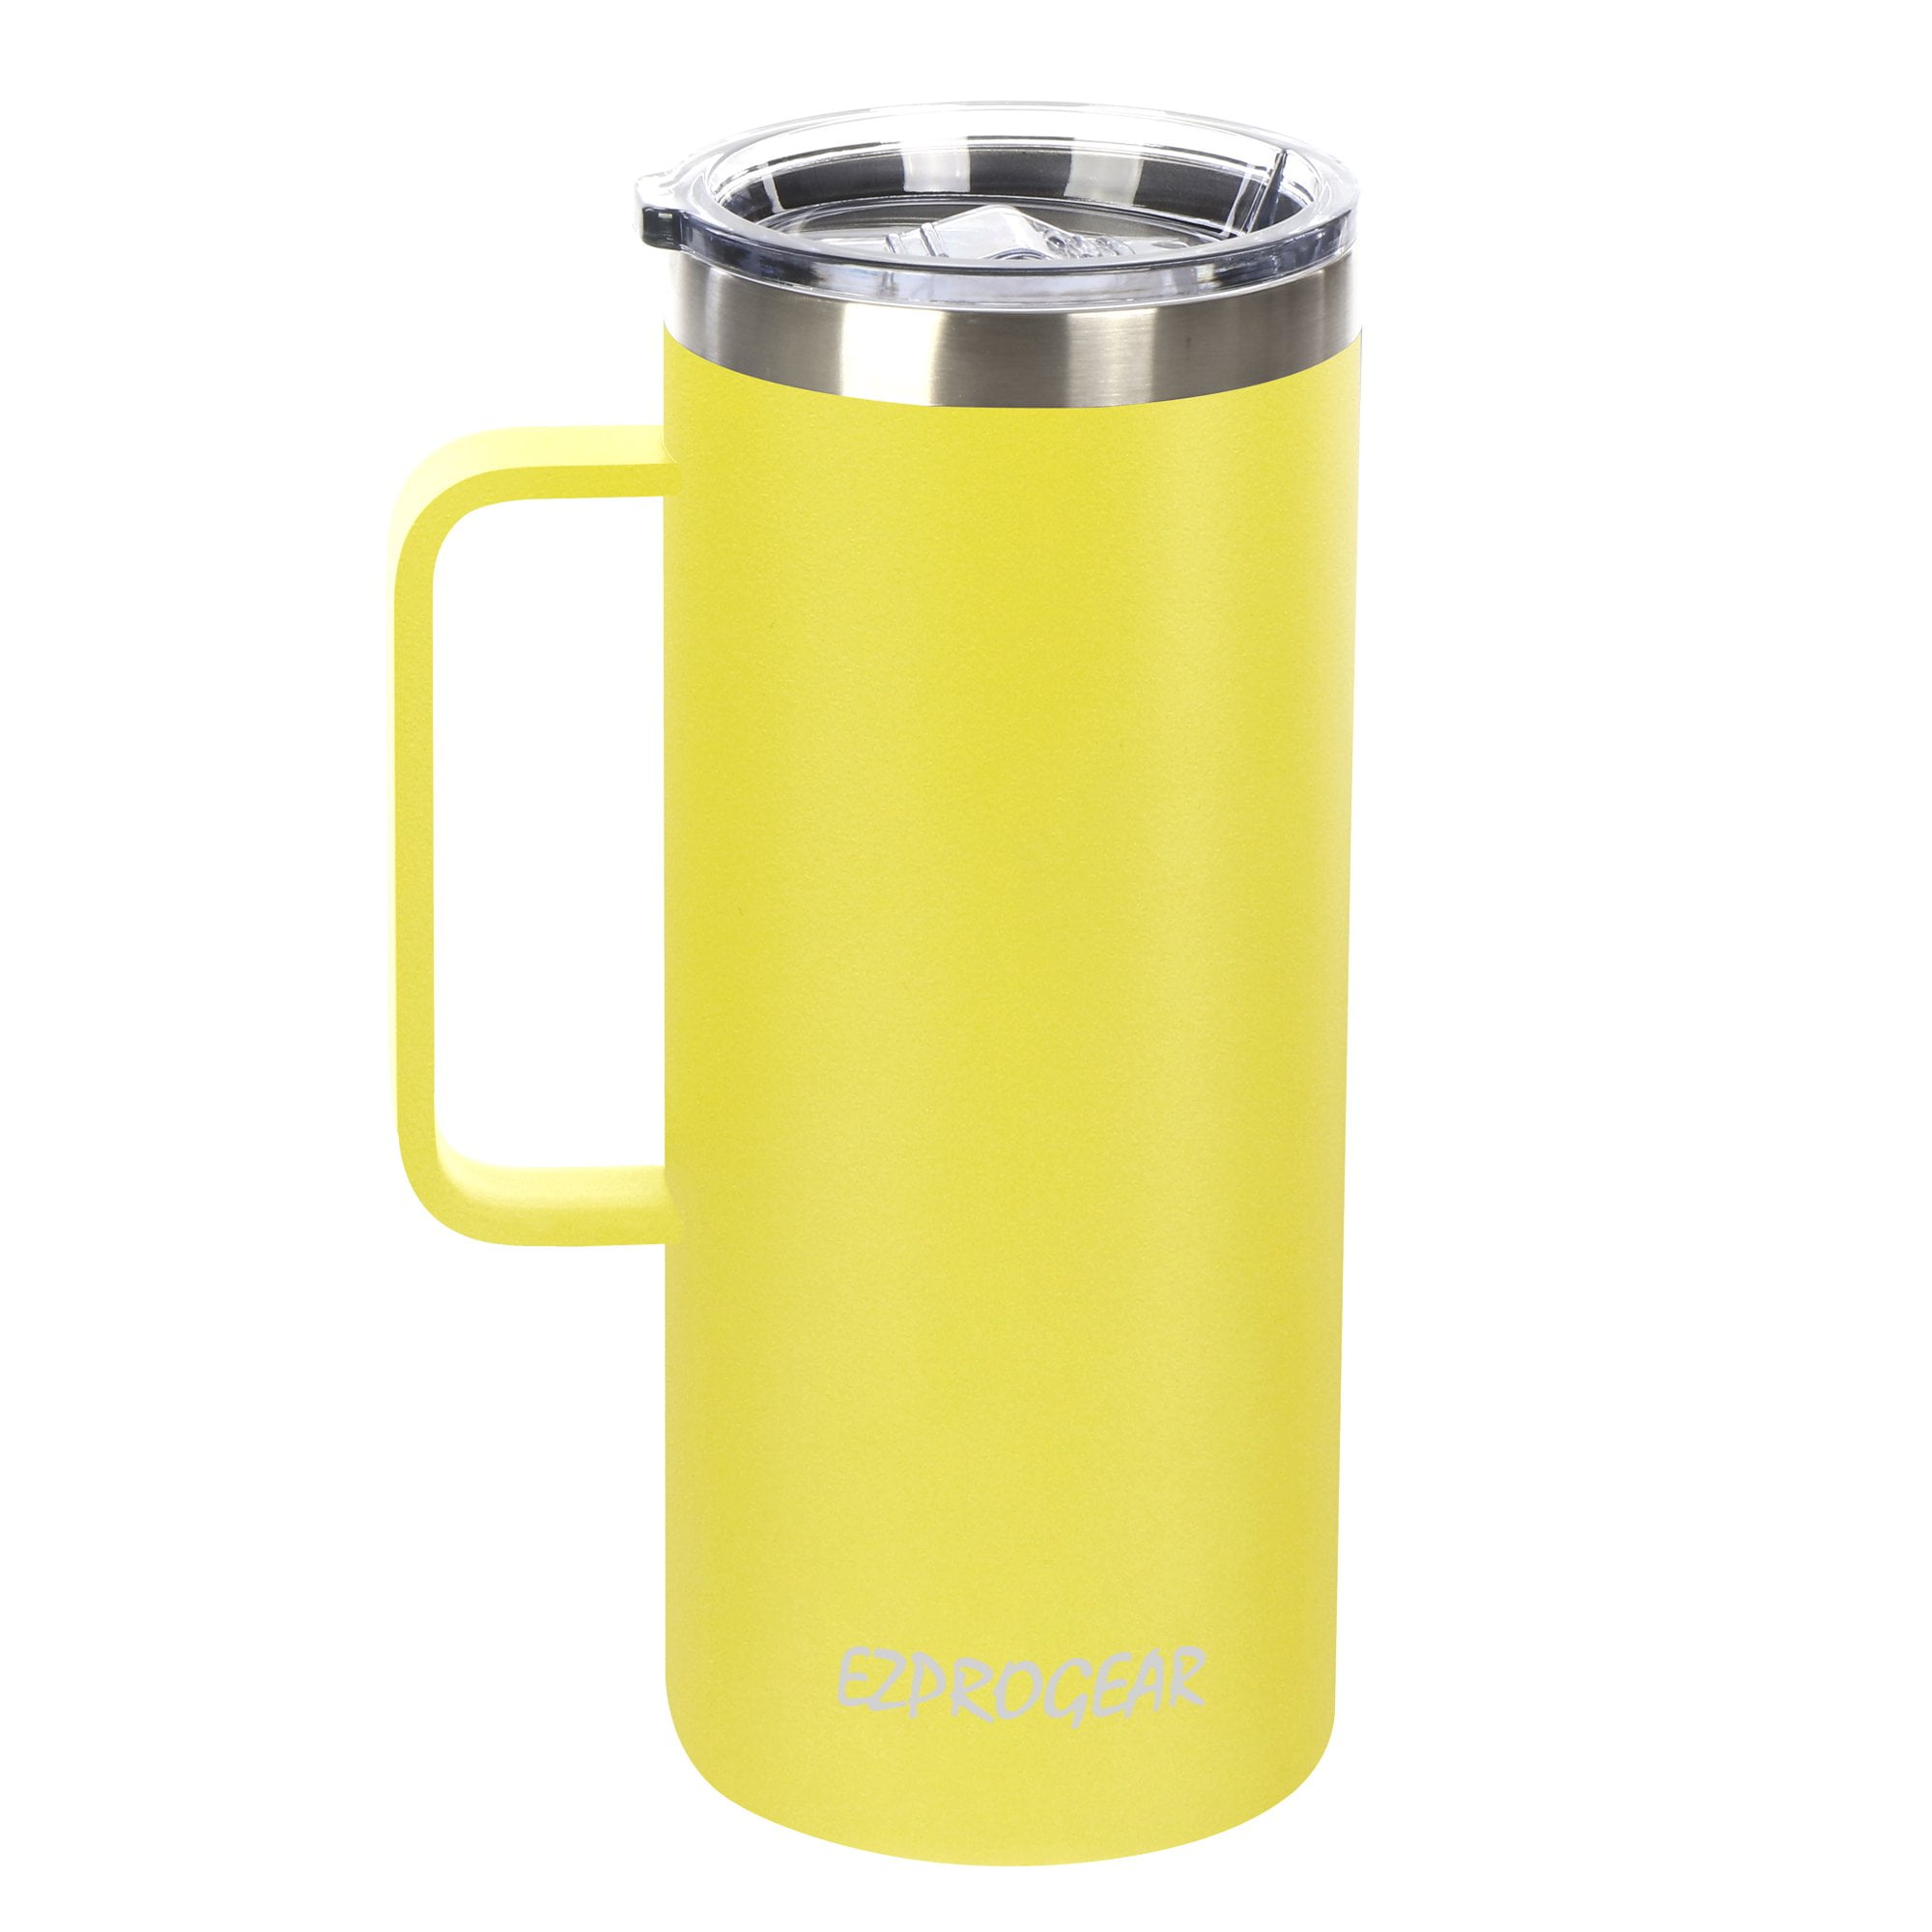 GREENWORKS : Stainless Steel Thermos Coffee Mug with Handle